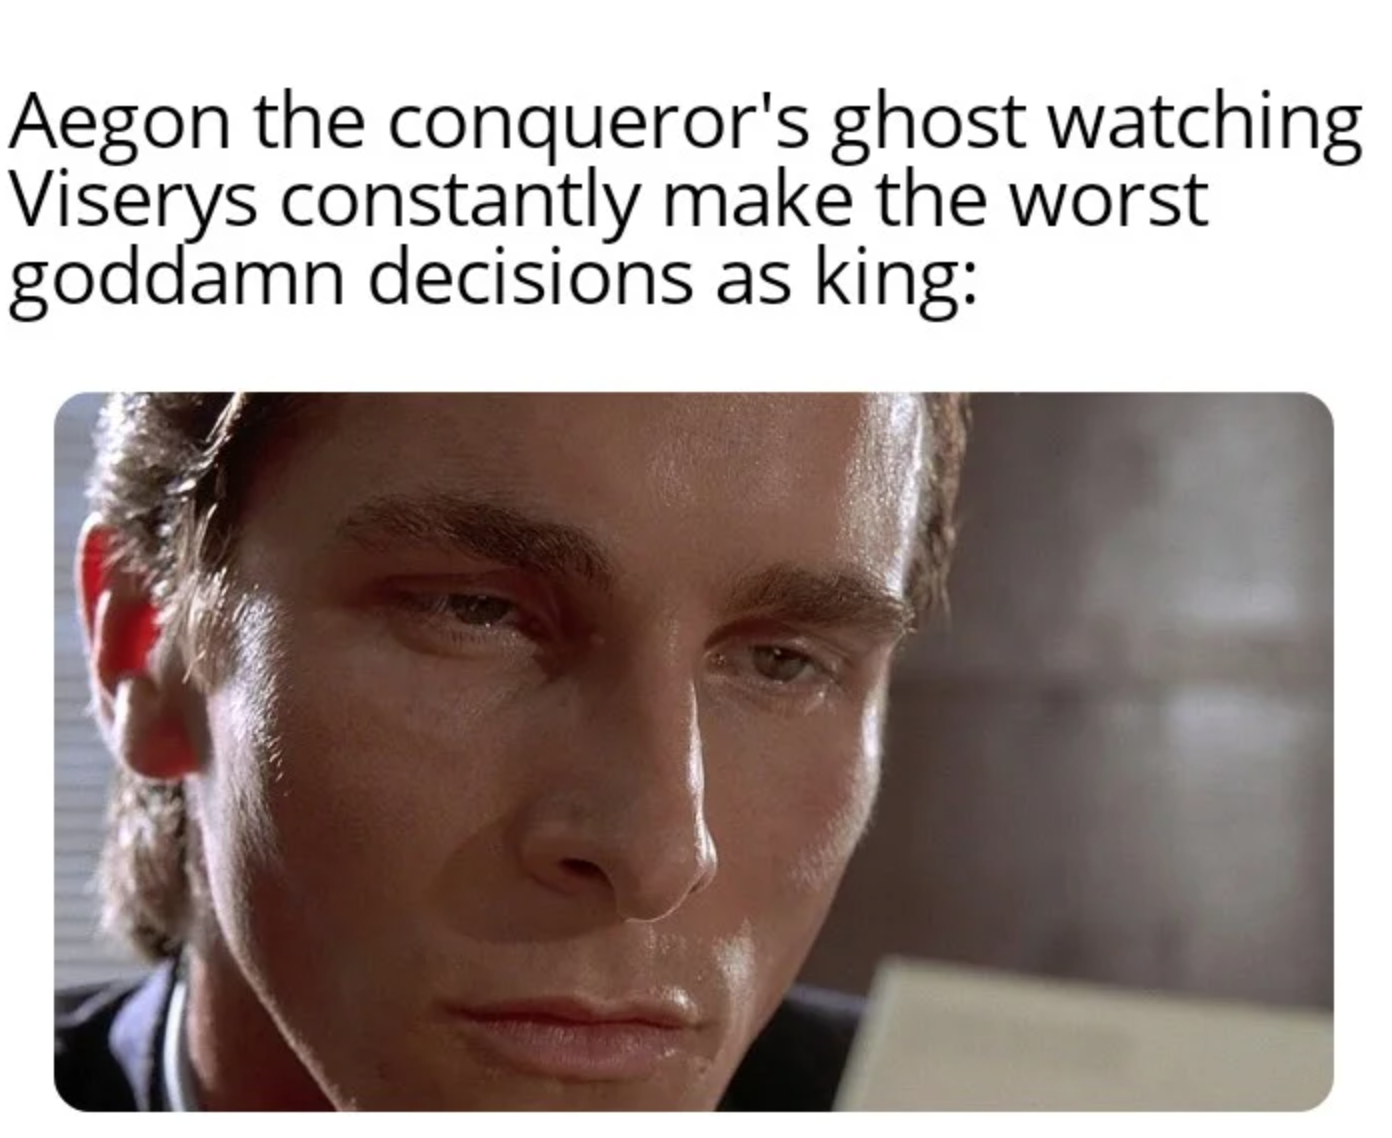 House of the Dragon Episode 2 memes - american psycho - Aegon the conqueror's ghost watching Viserys constantly make the worst goddamn decisions as king